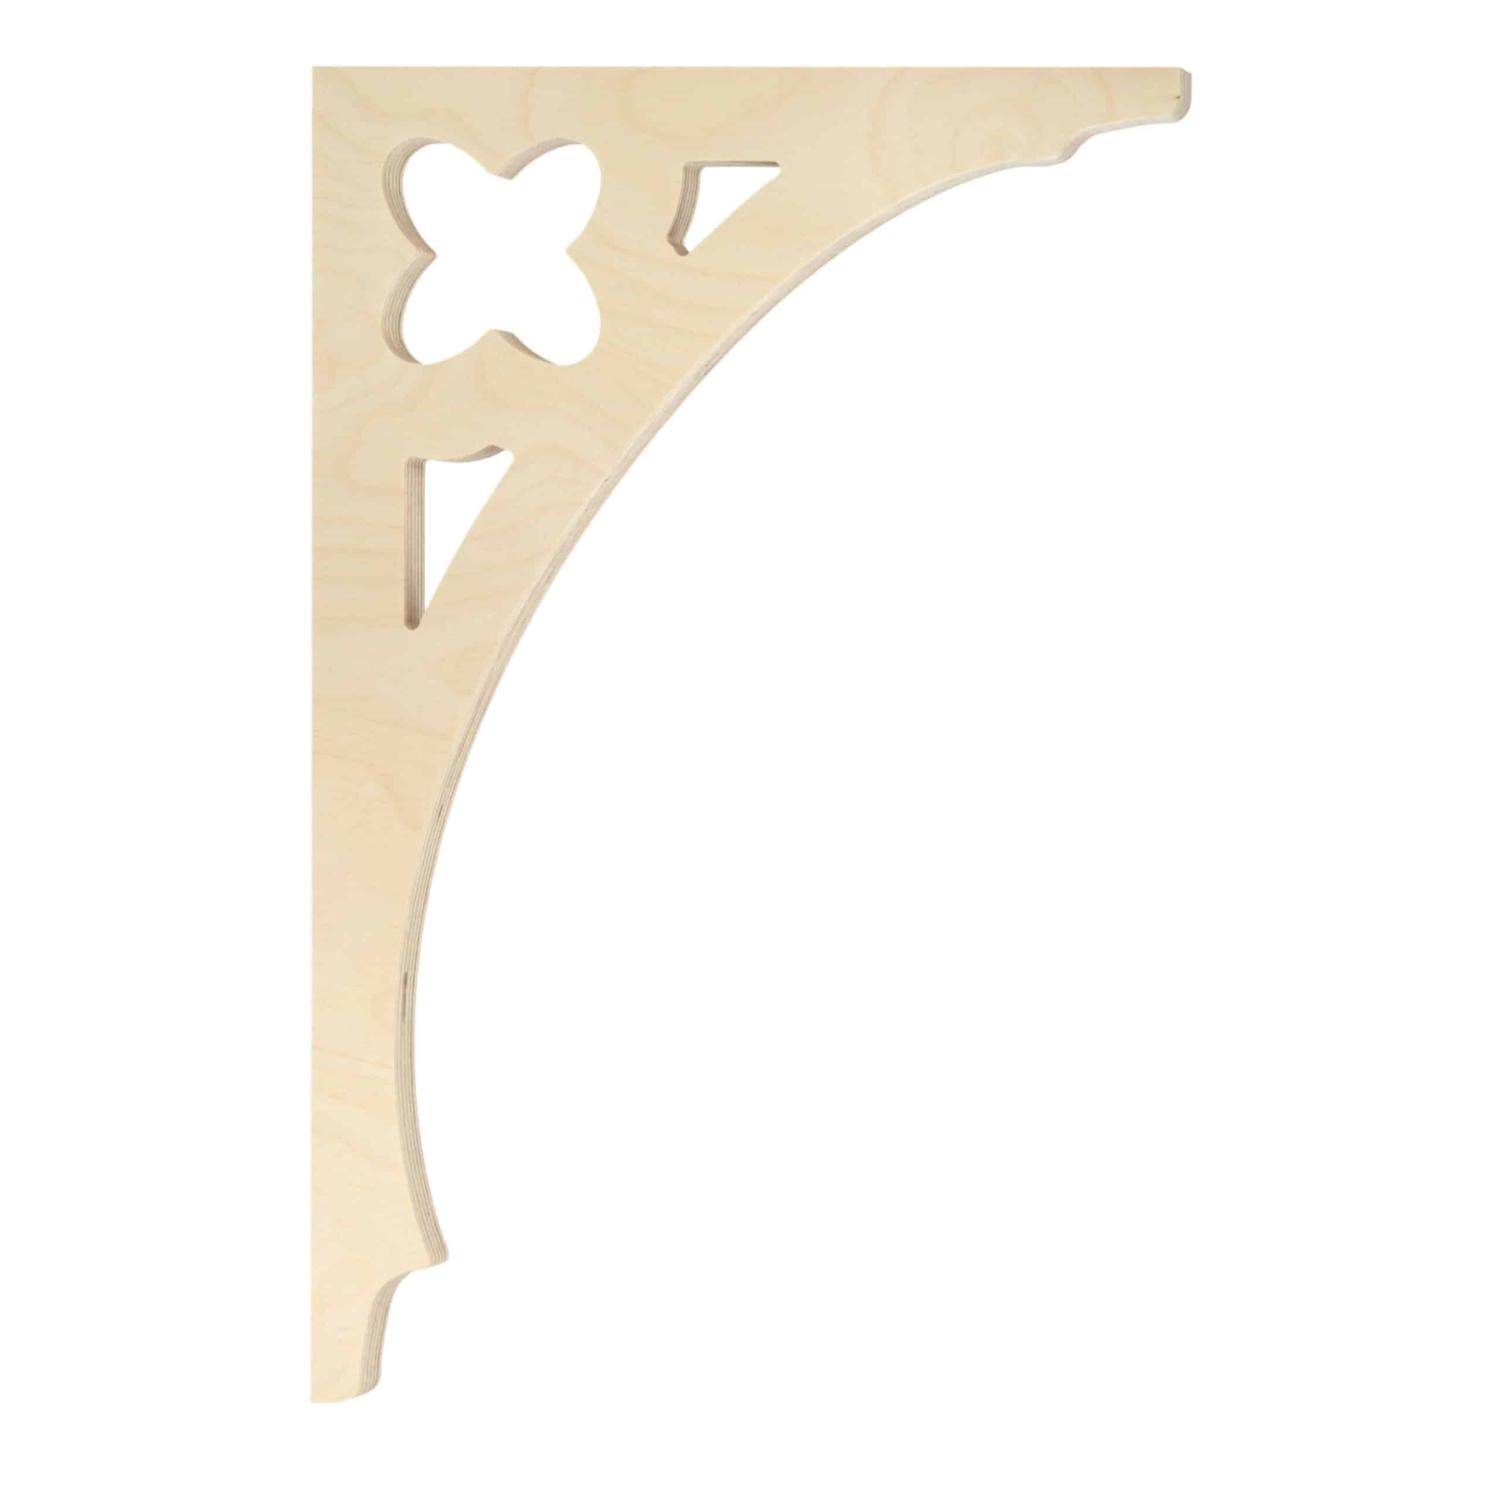 Bracket 031 - Classic wooden corbel & bracket in Victorian style and with ornaments for porch, portico and veranda.